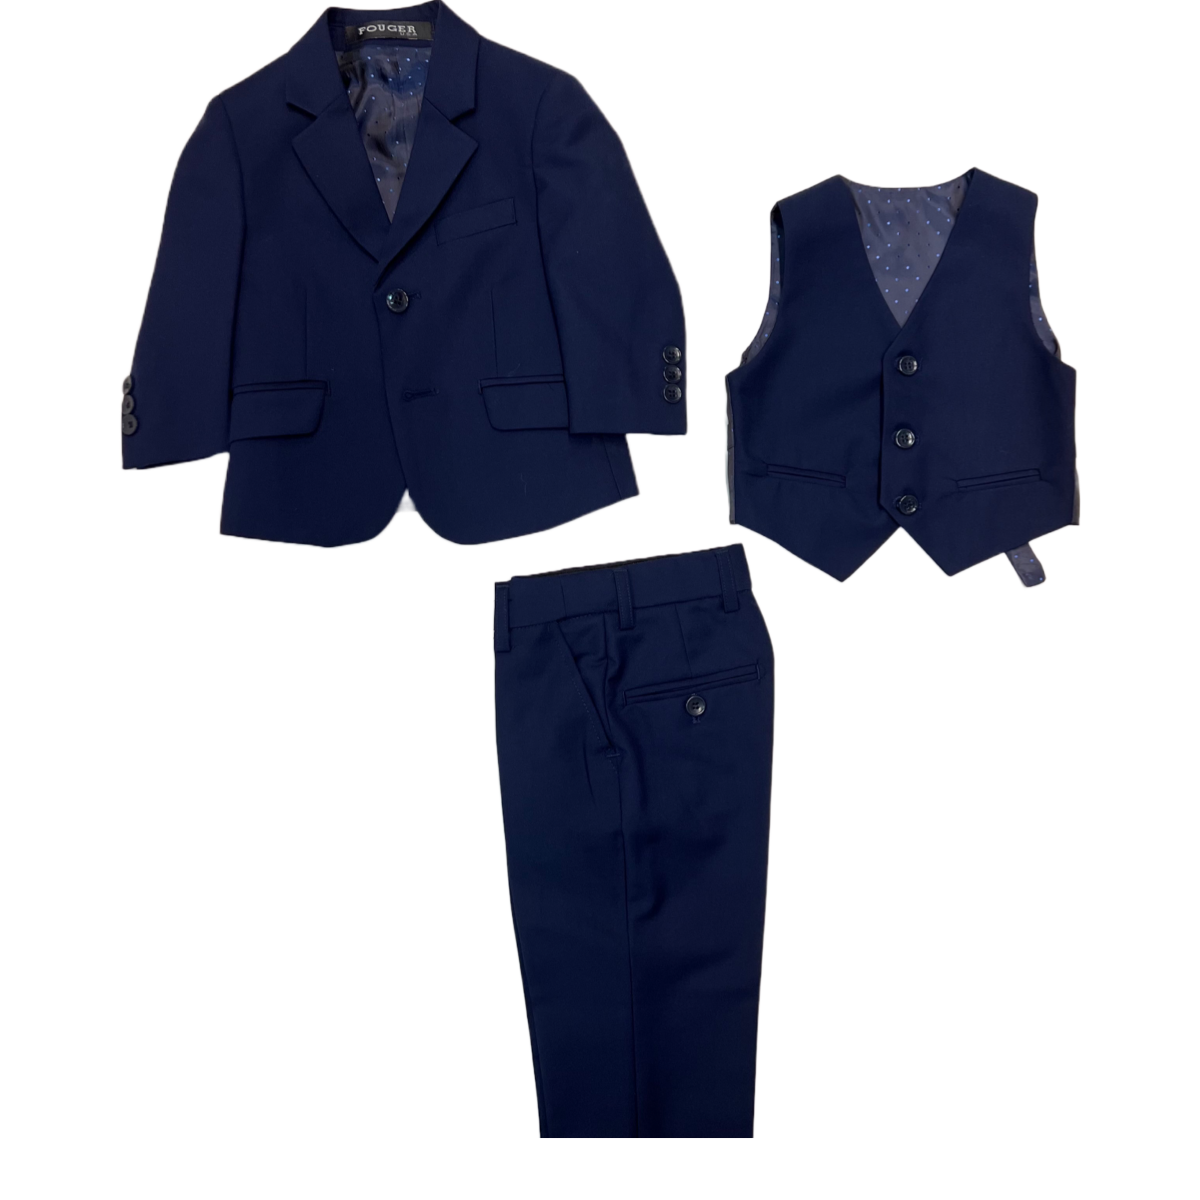 Fouger U.S.A. Slim/Modern Fit 3-Piece Baby Navy Suit